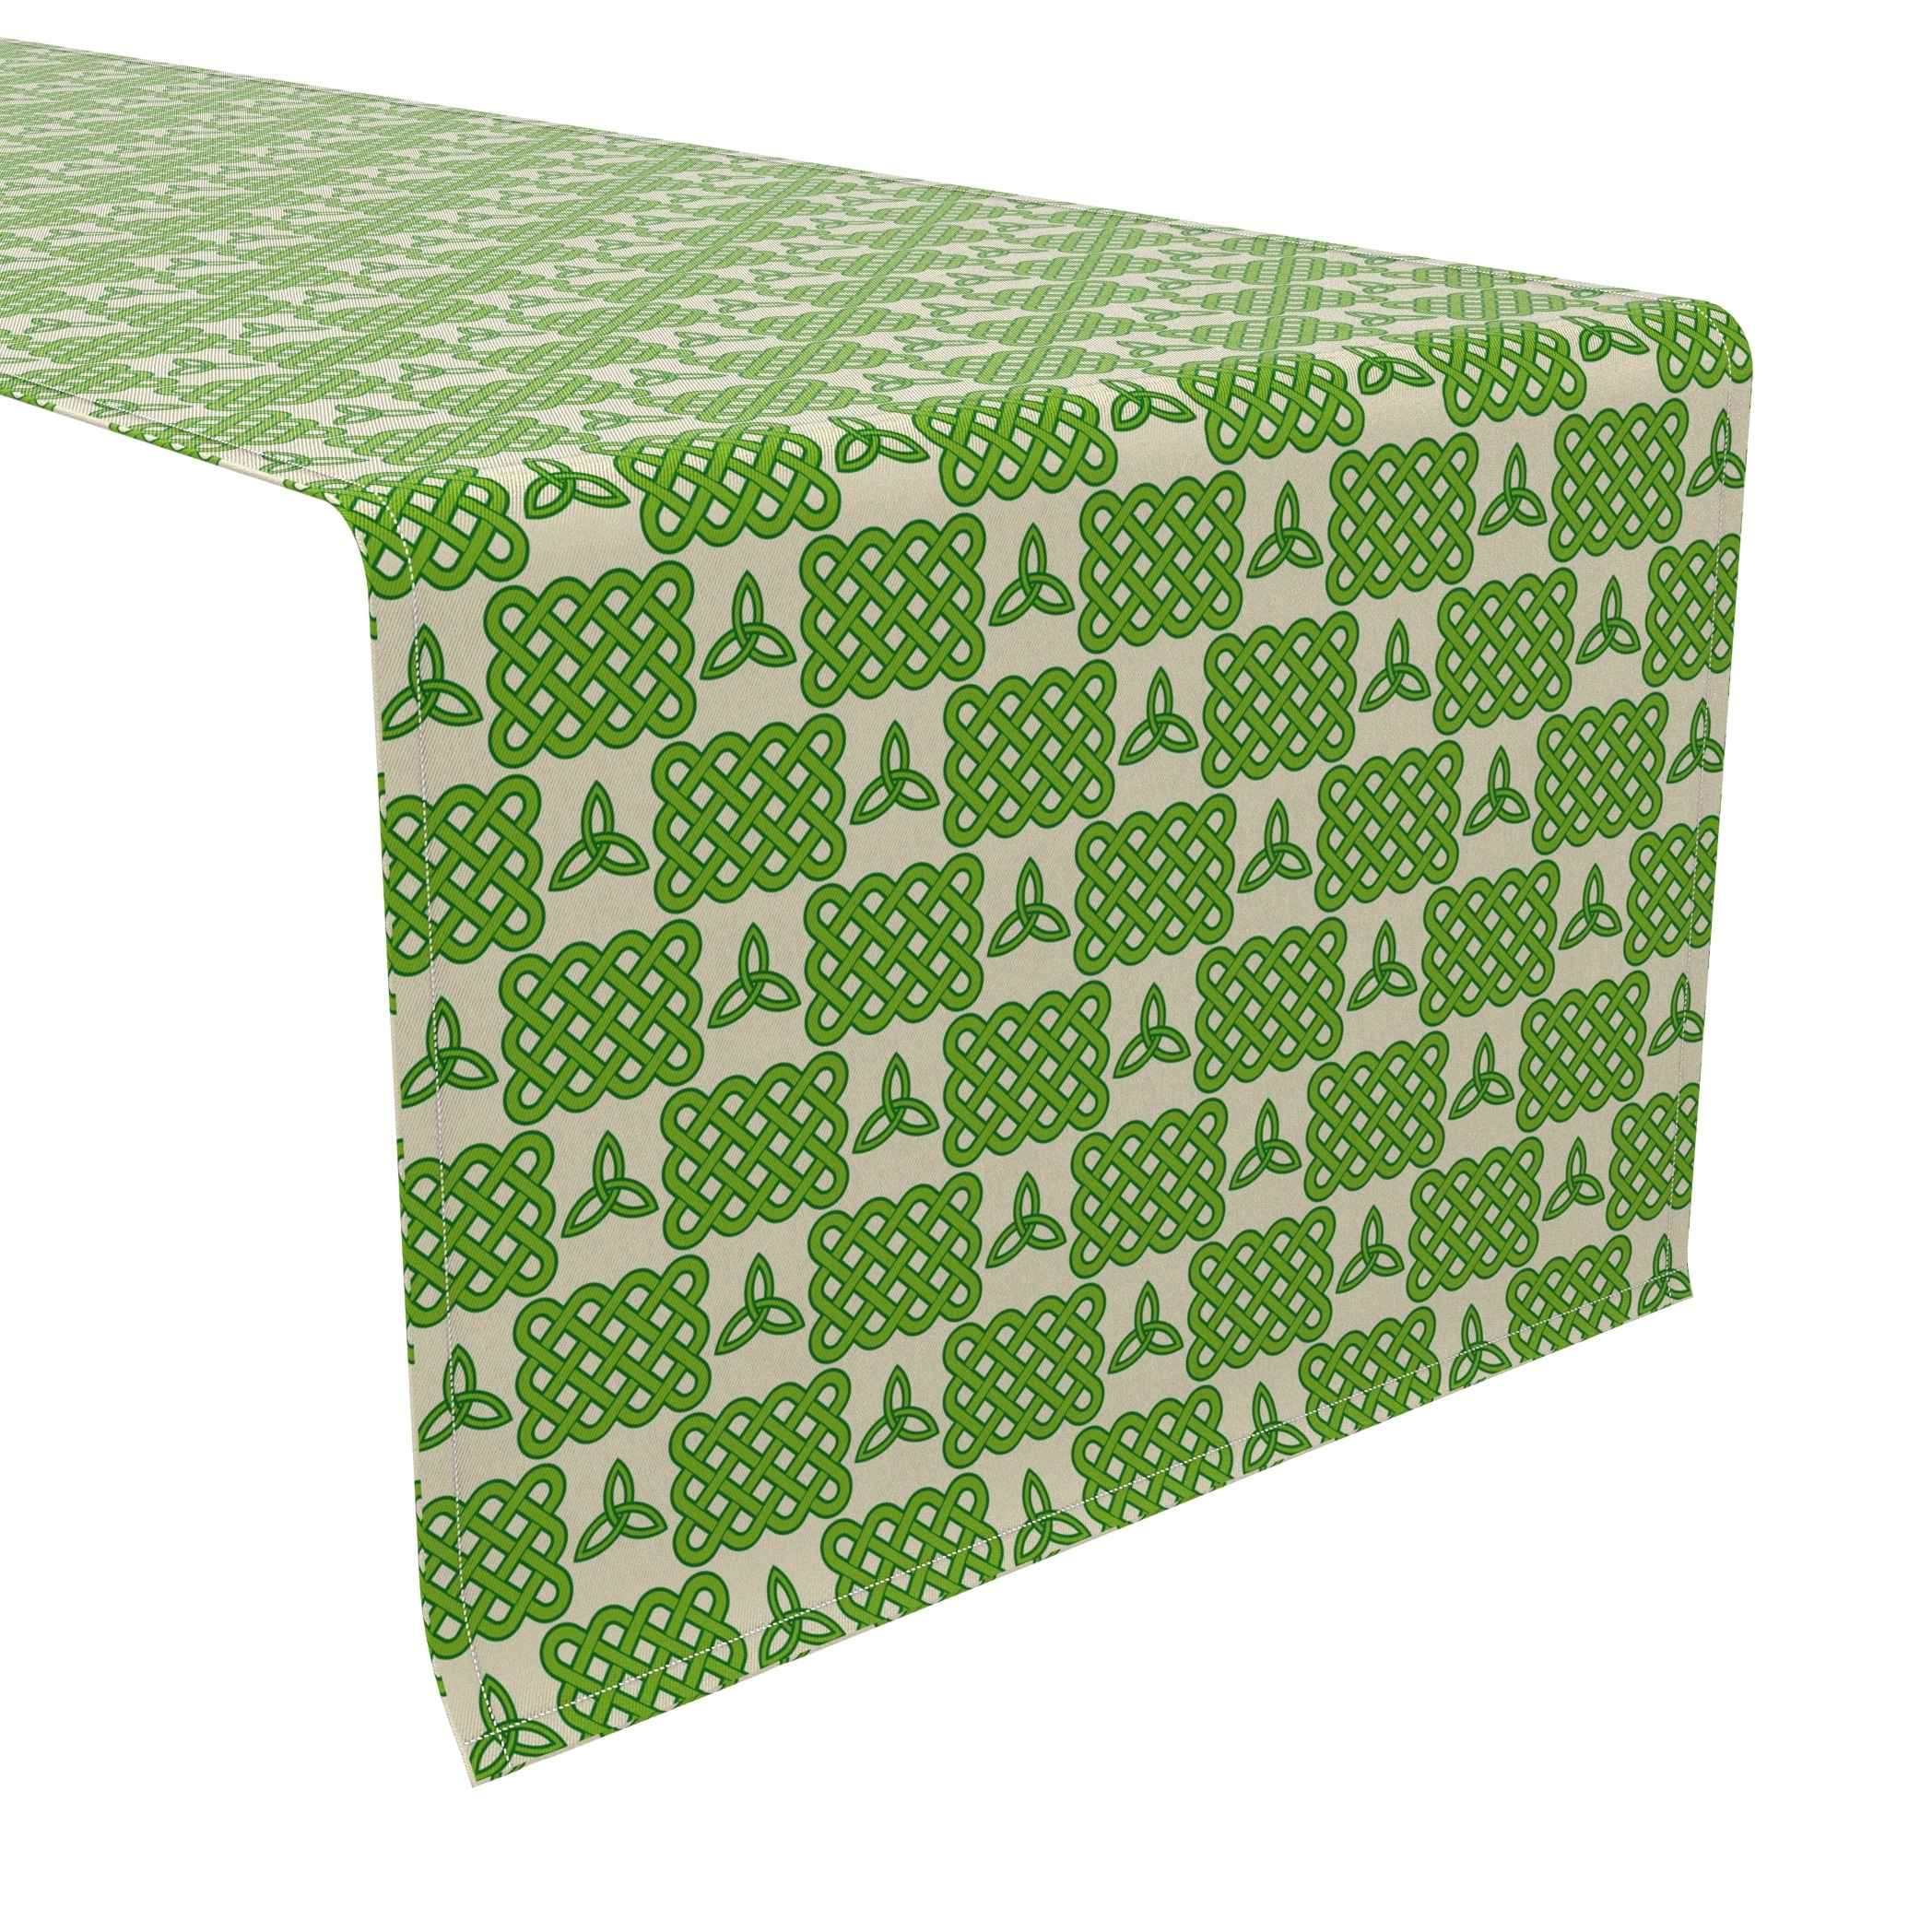 Fabric Textile Products, Inc. Table Runner, 100% Cotton, 16x108", Celtic Knots and Symbols